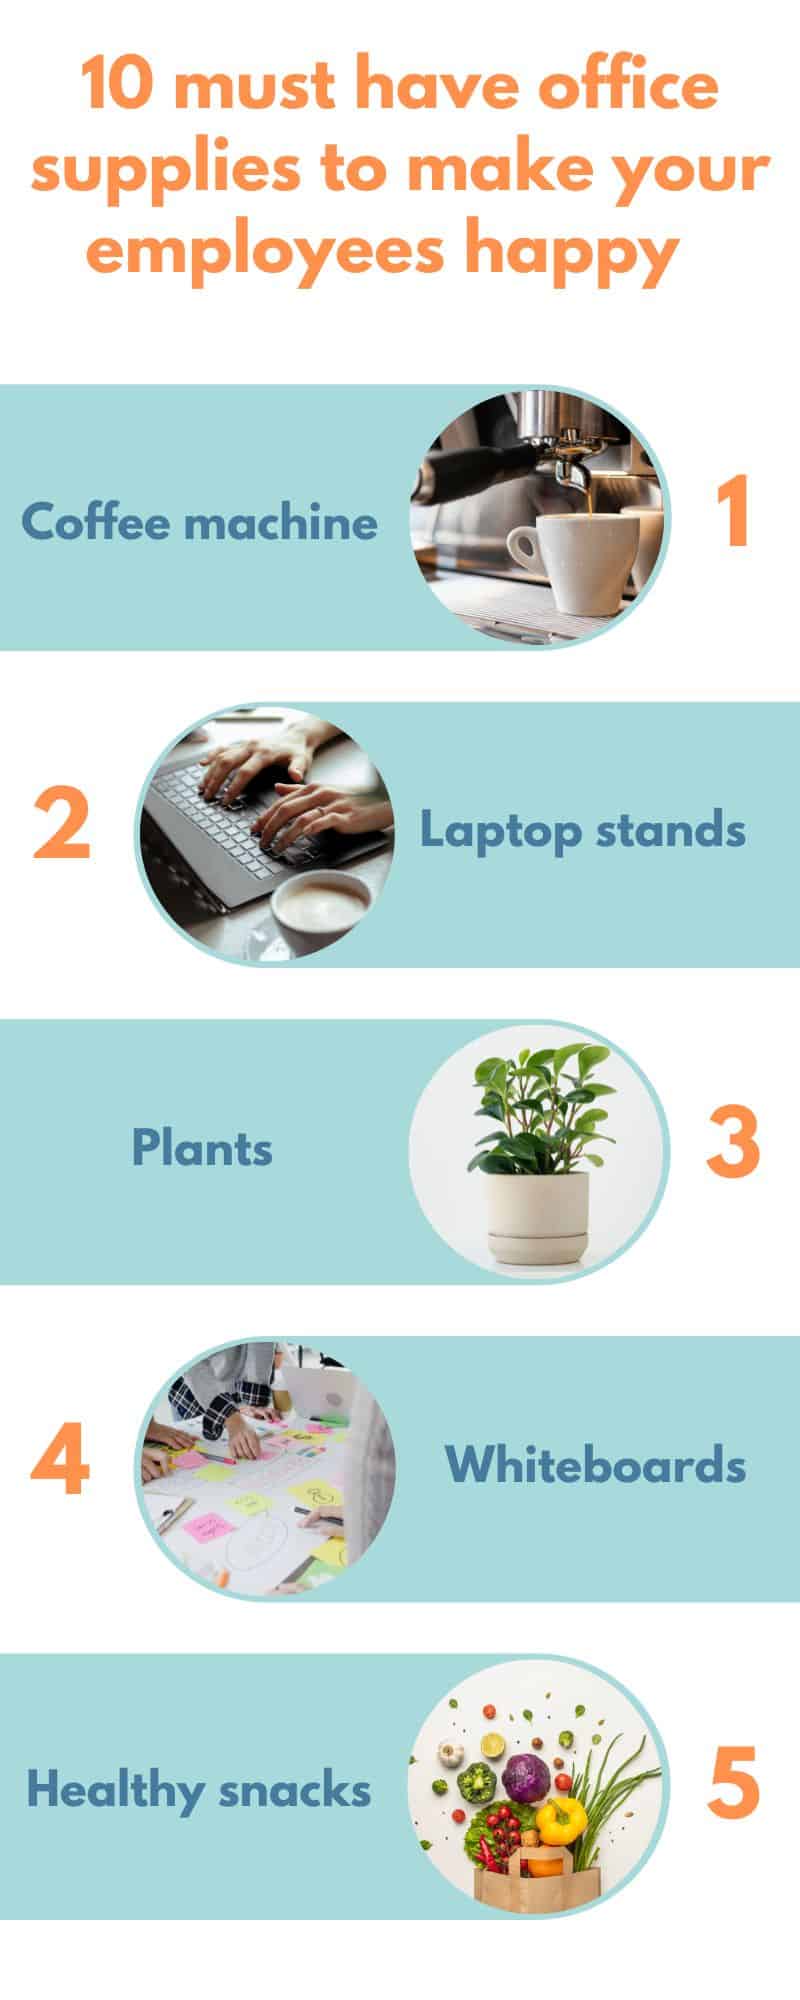 infographic-must-have-office-supplies1